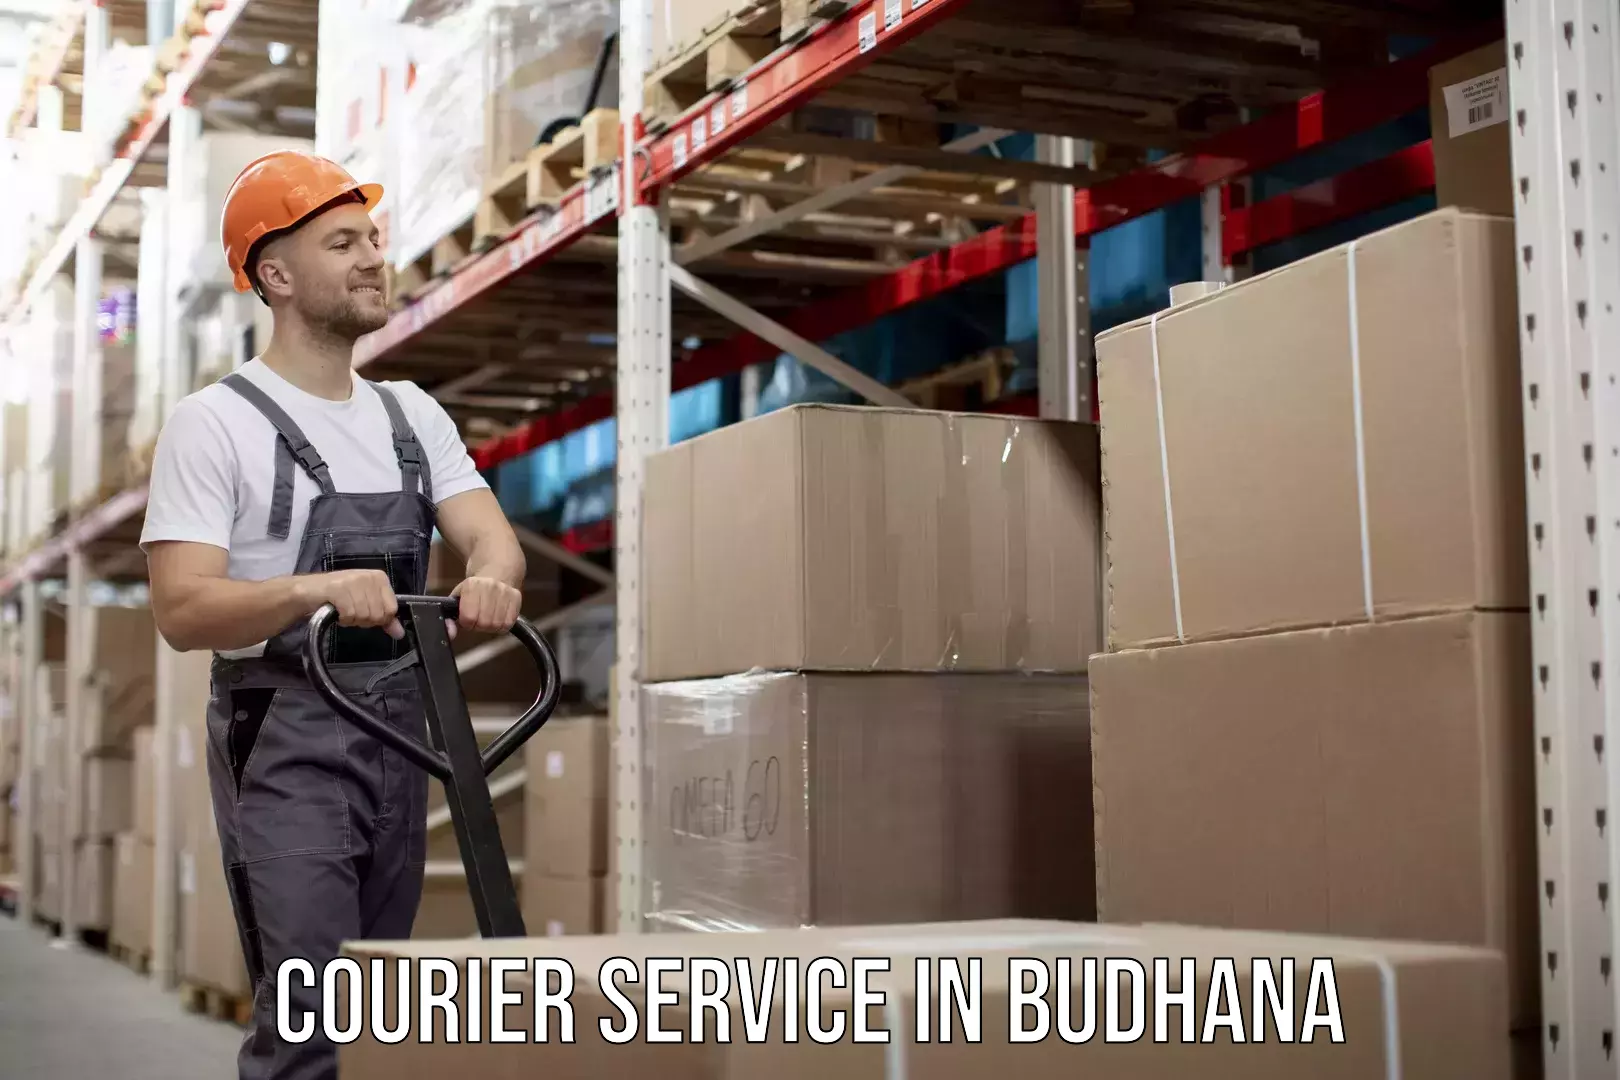 Expedited shipping methods in Budhana